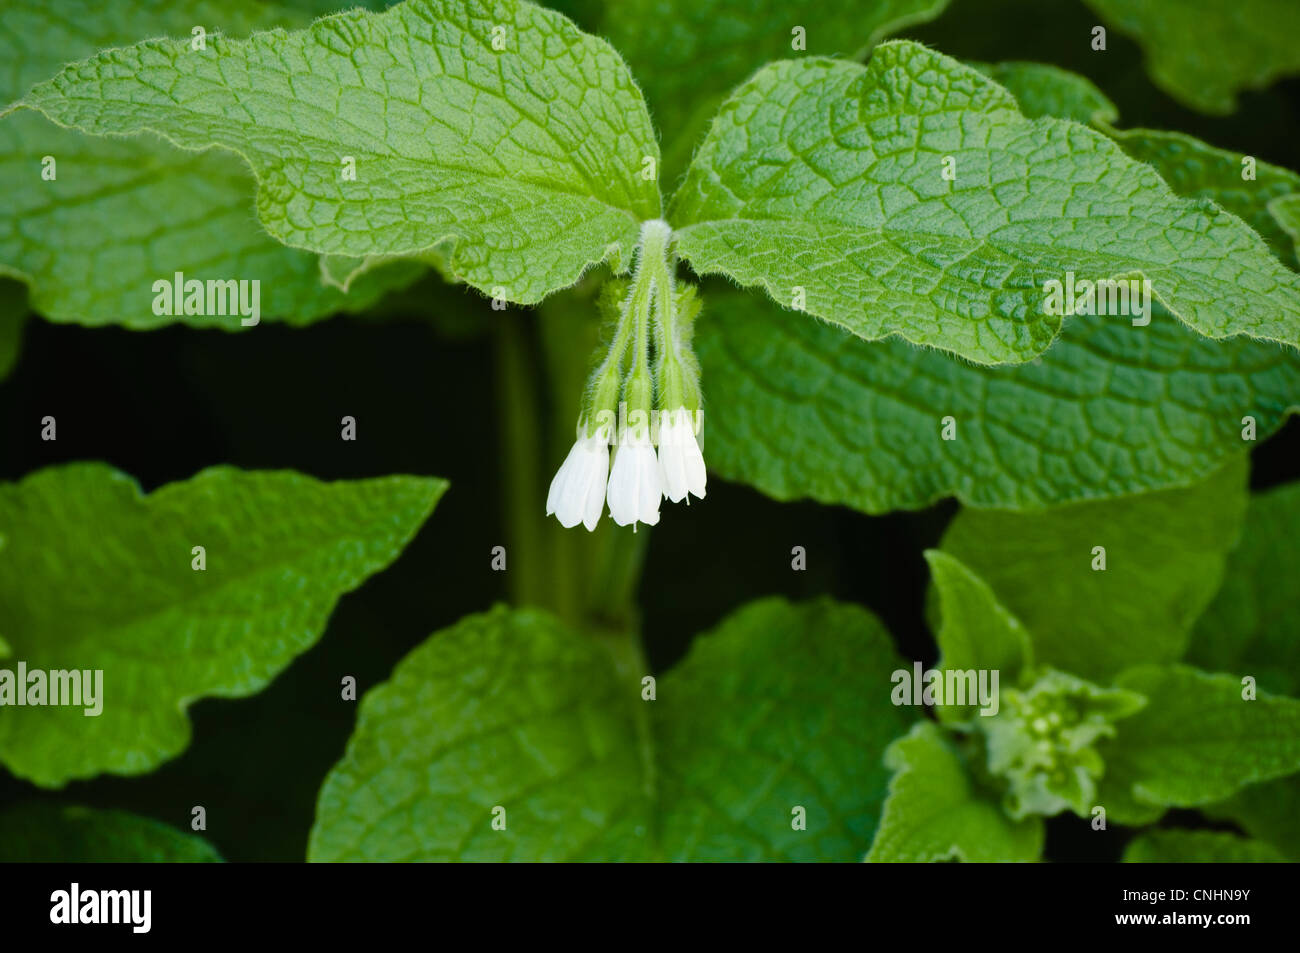 Comfrey (Symphytum officinale) leaves and flowers. The leaves, rich in potassium, are ideal to use as an organic fertiliser. UK. Stock Photo